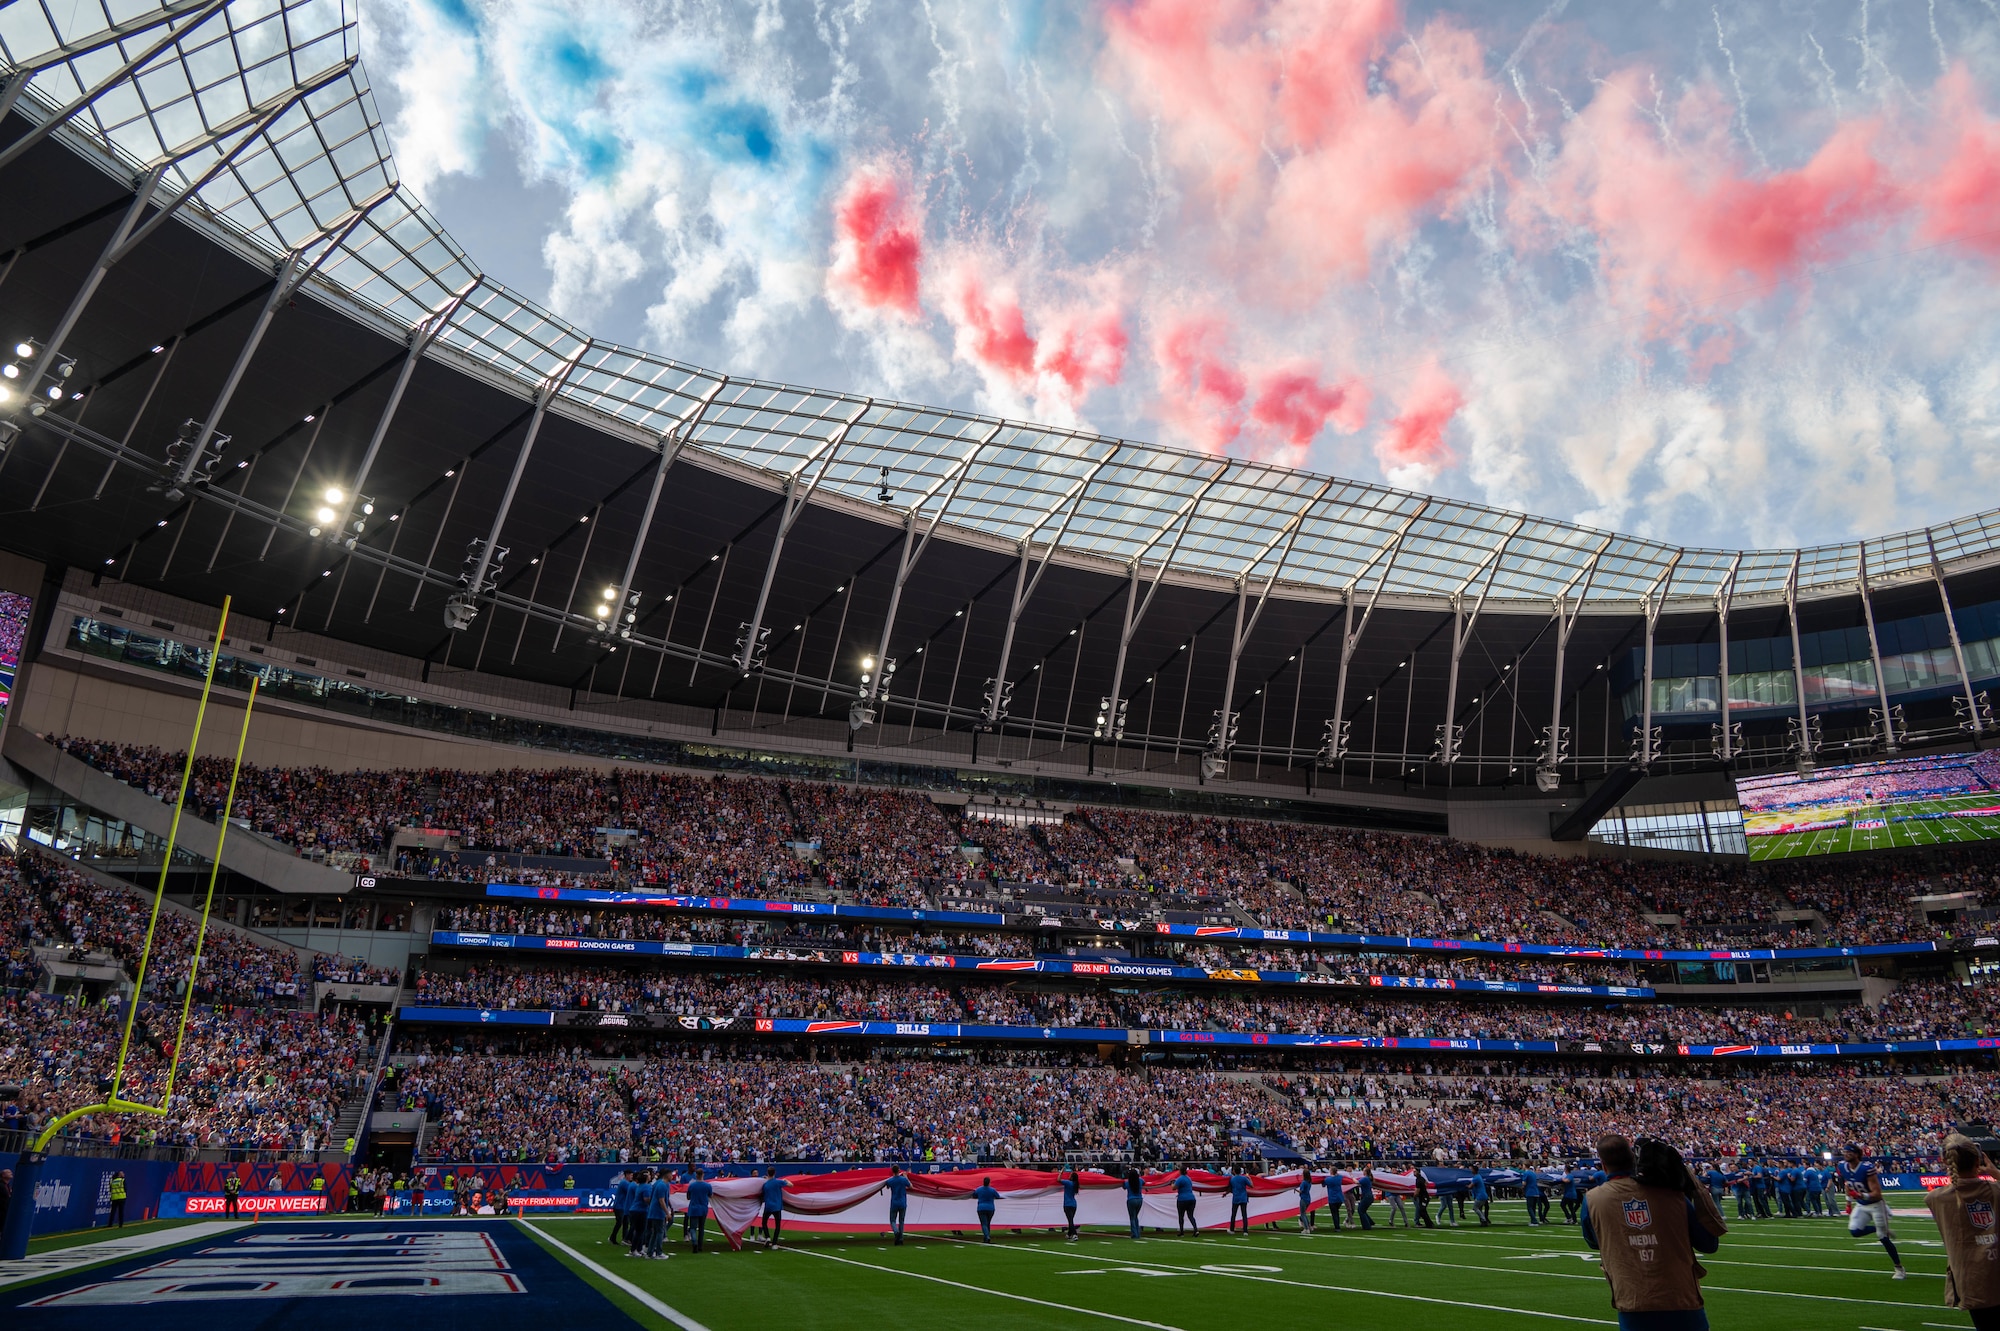 61,000 football fans cheer before the start of a football game while red, white and blue smoke rises behind them